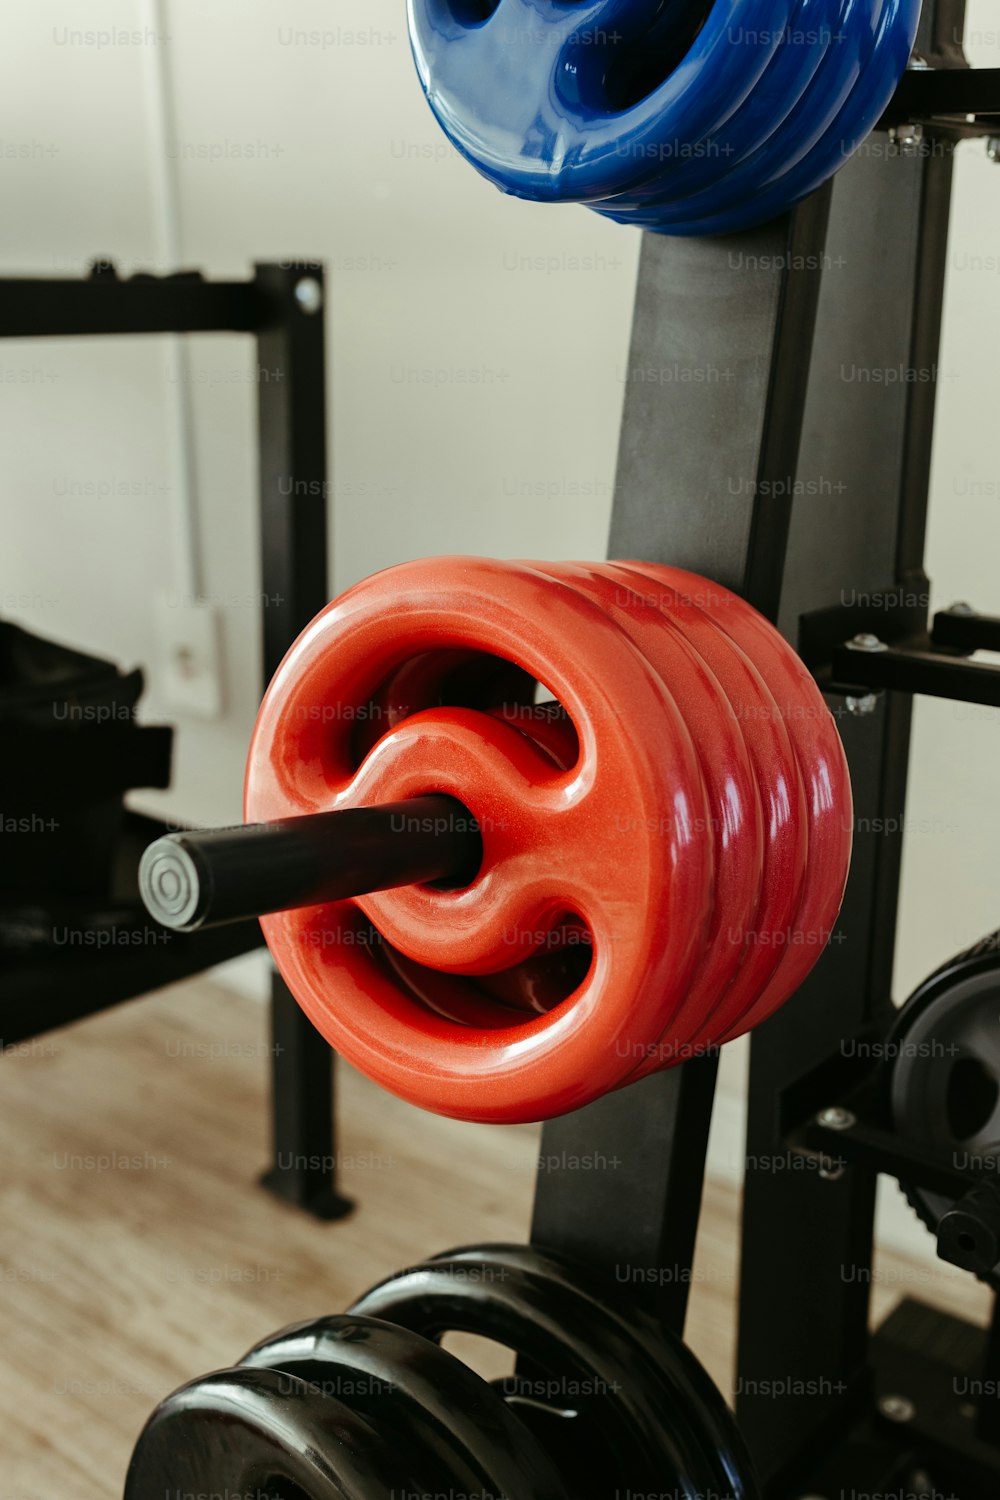 a pair of red and blue dumbbells hanging from a rack